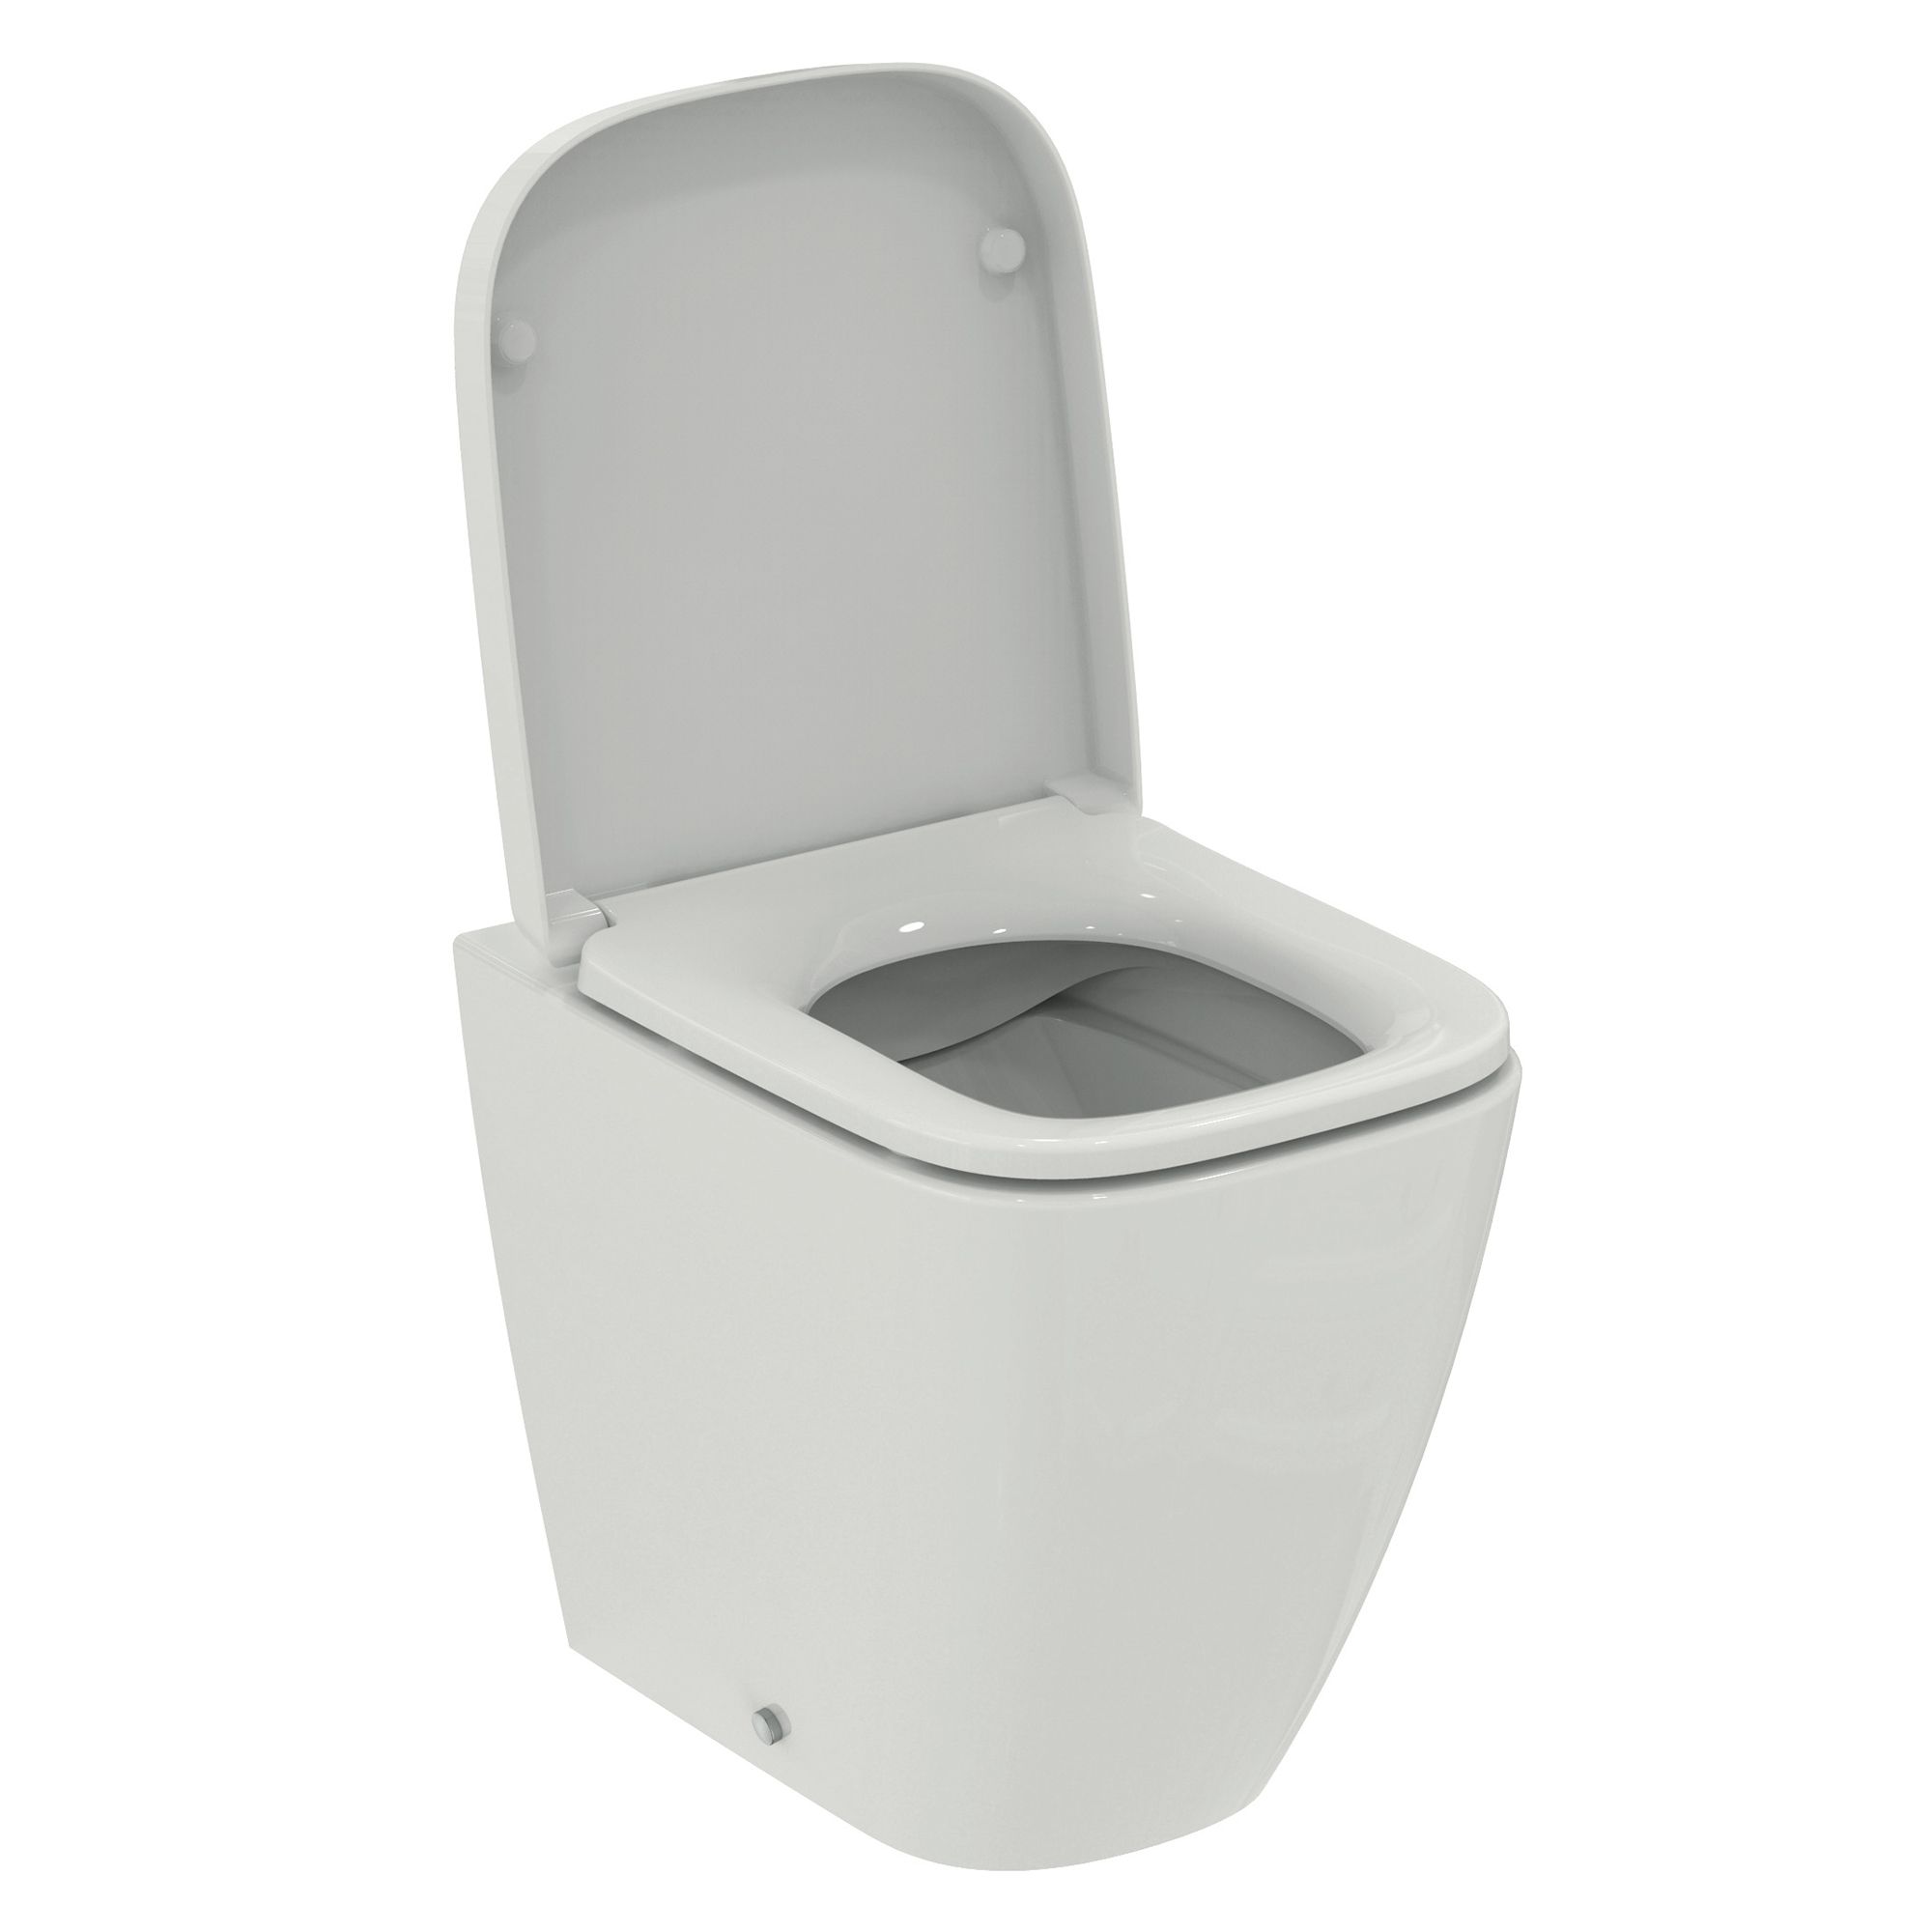 Ideal Standard i.life S White Rimless Back to wall Square Toilet pan with Soft close seat